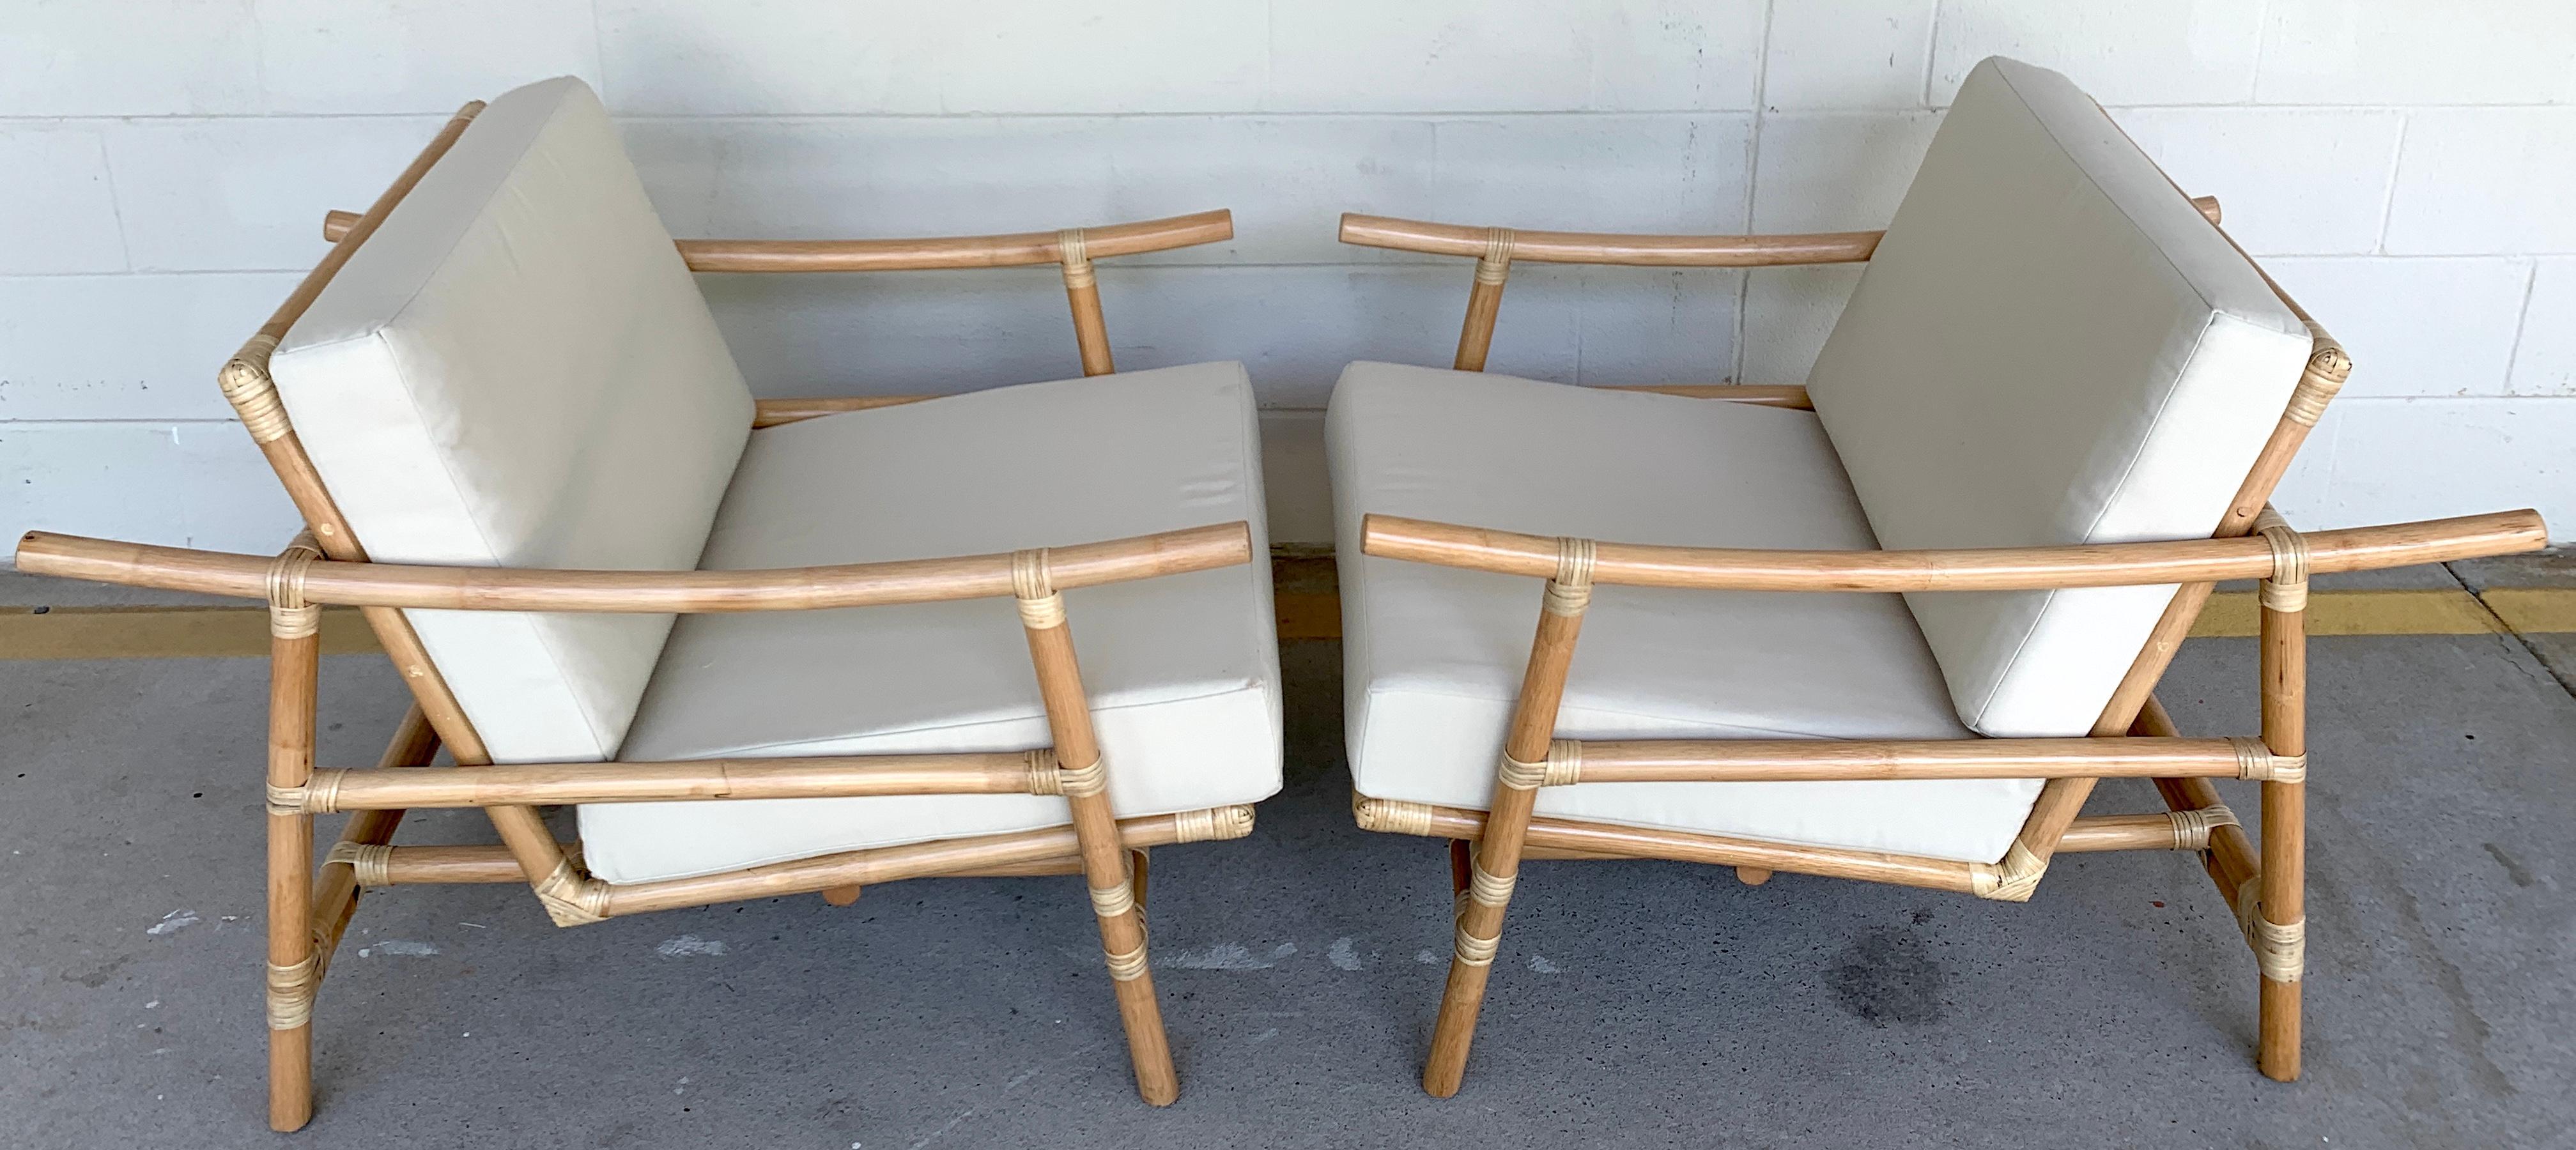 Pair of Ficks Reed natural rattan lounge club chairs by John Wisner, Restored,
Each one with beautiful natural finish, sturdy chairs. Complete with muslin template cushions. The cushions are recent and useable, ready for COM.
Measures: arm height